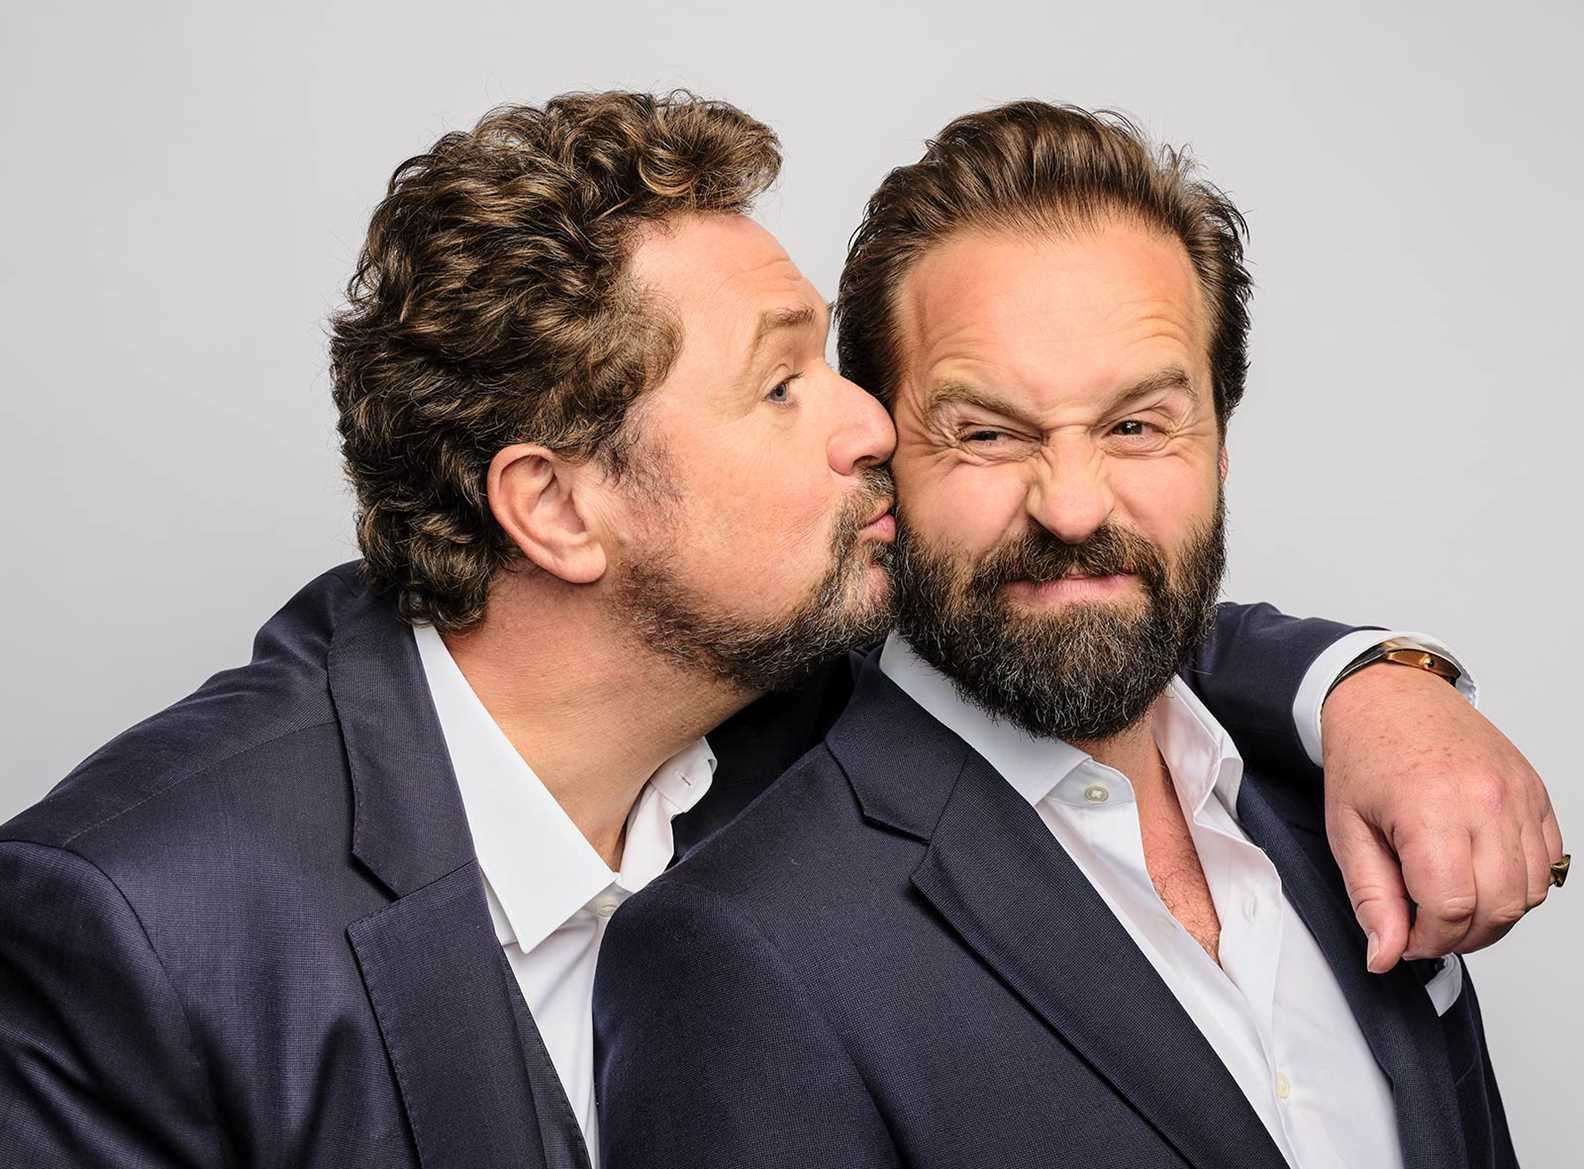 Michael Ball and Alfie Boe have performed to sold-out crowds across the country